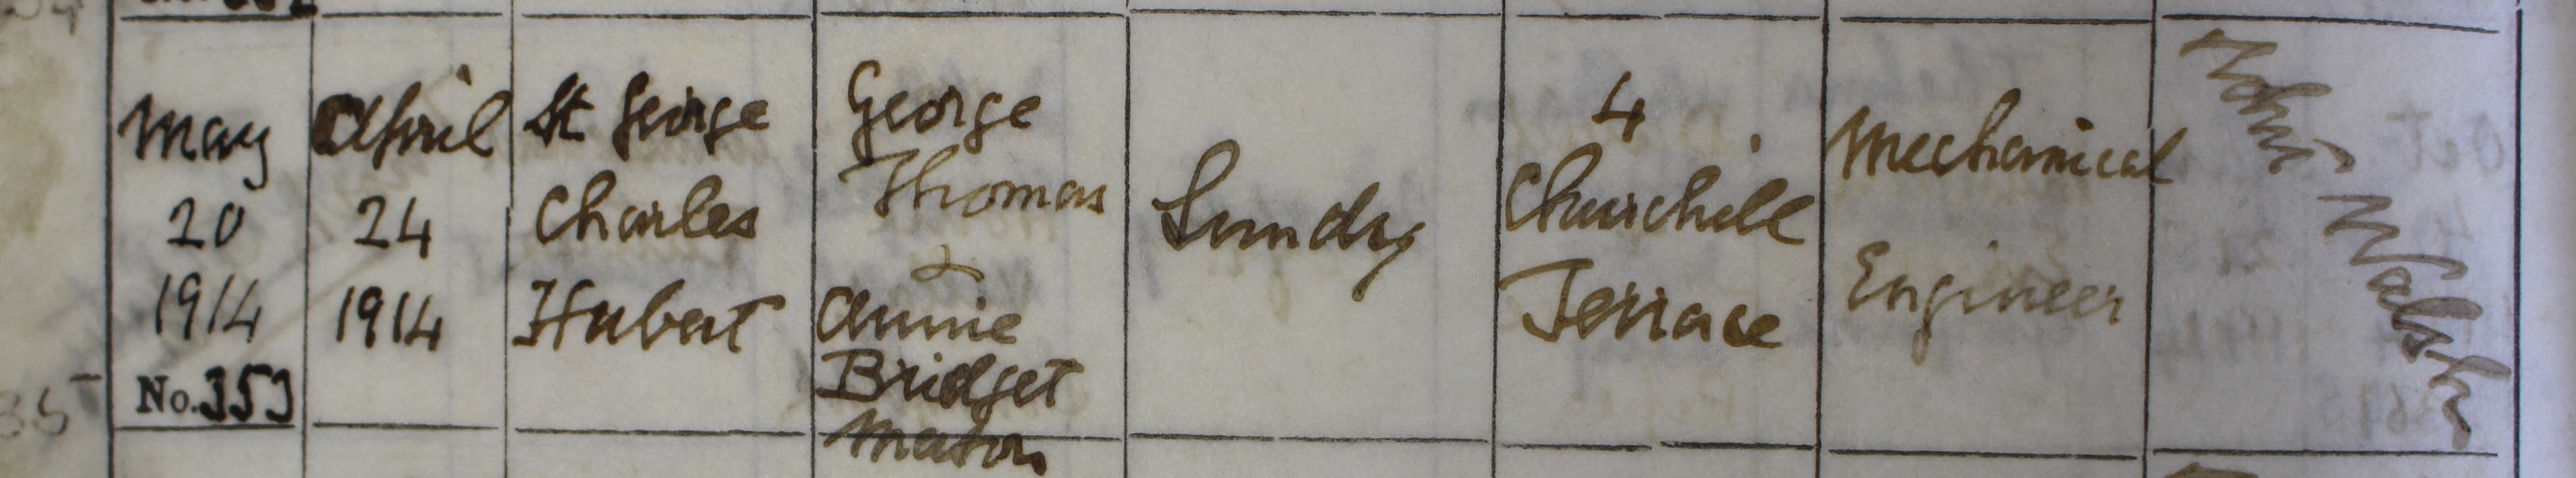 The baptism record for St George Lundy, St Mary's, Donnybrook. RCB Library P246.2.2